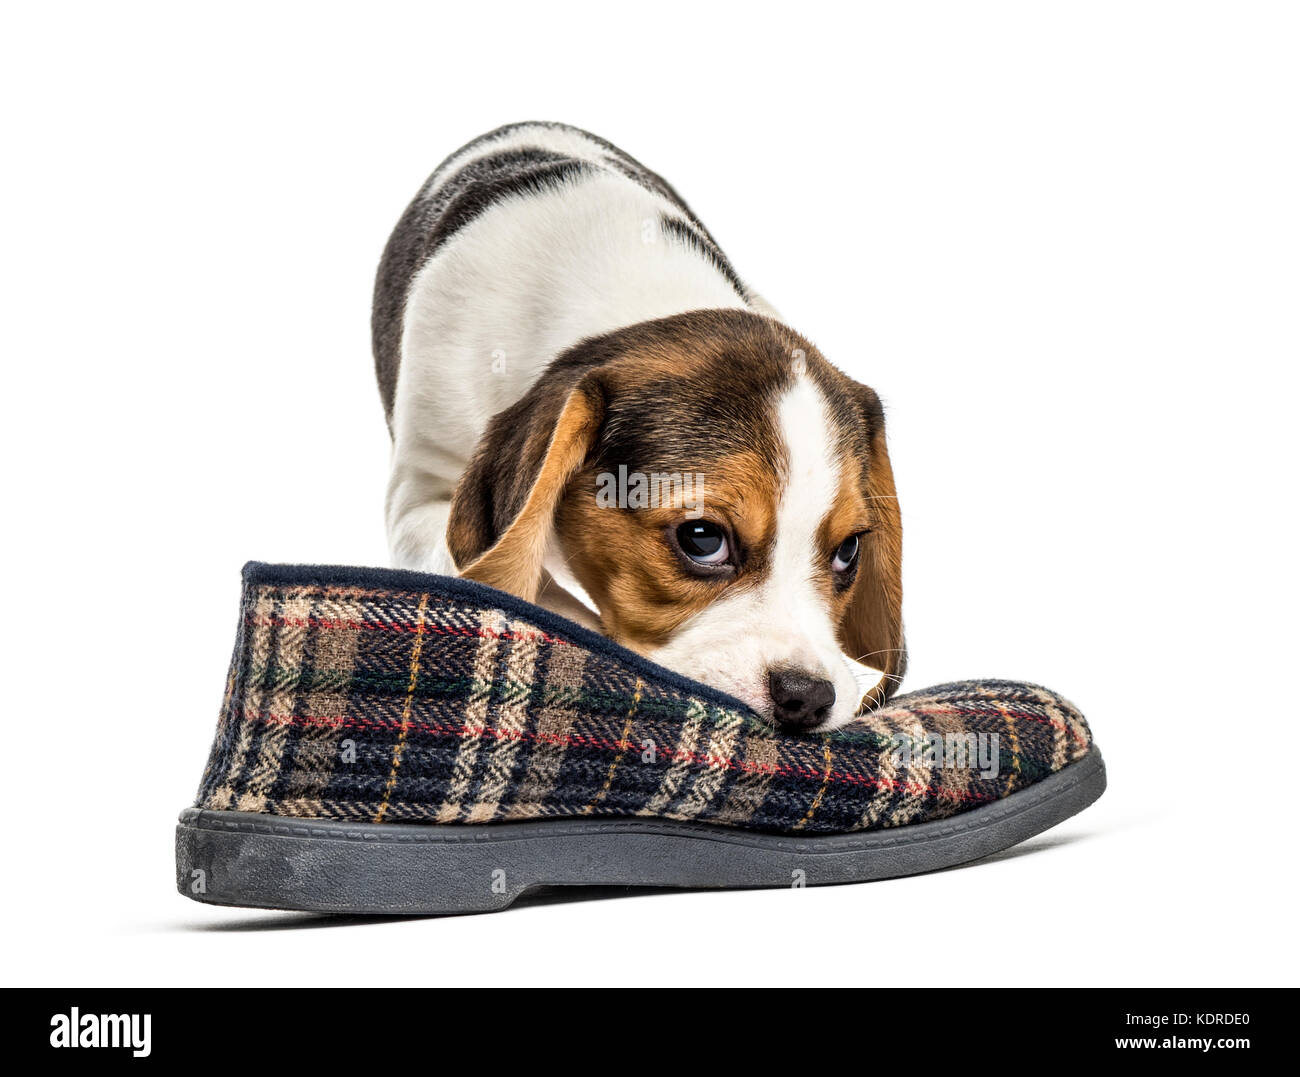 Jack russel puppy playing with a slipper, isolated on white Stock Photo